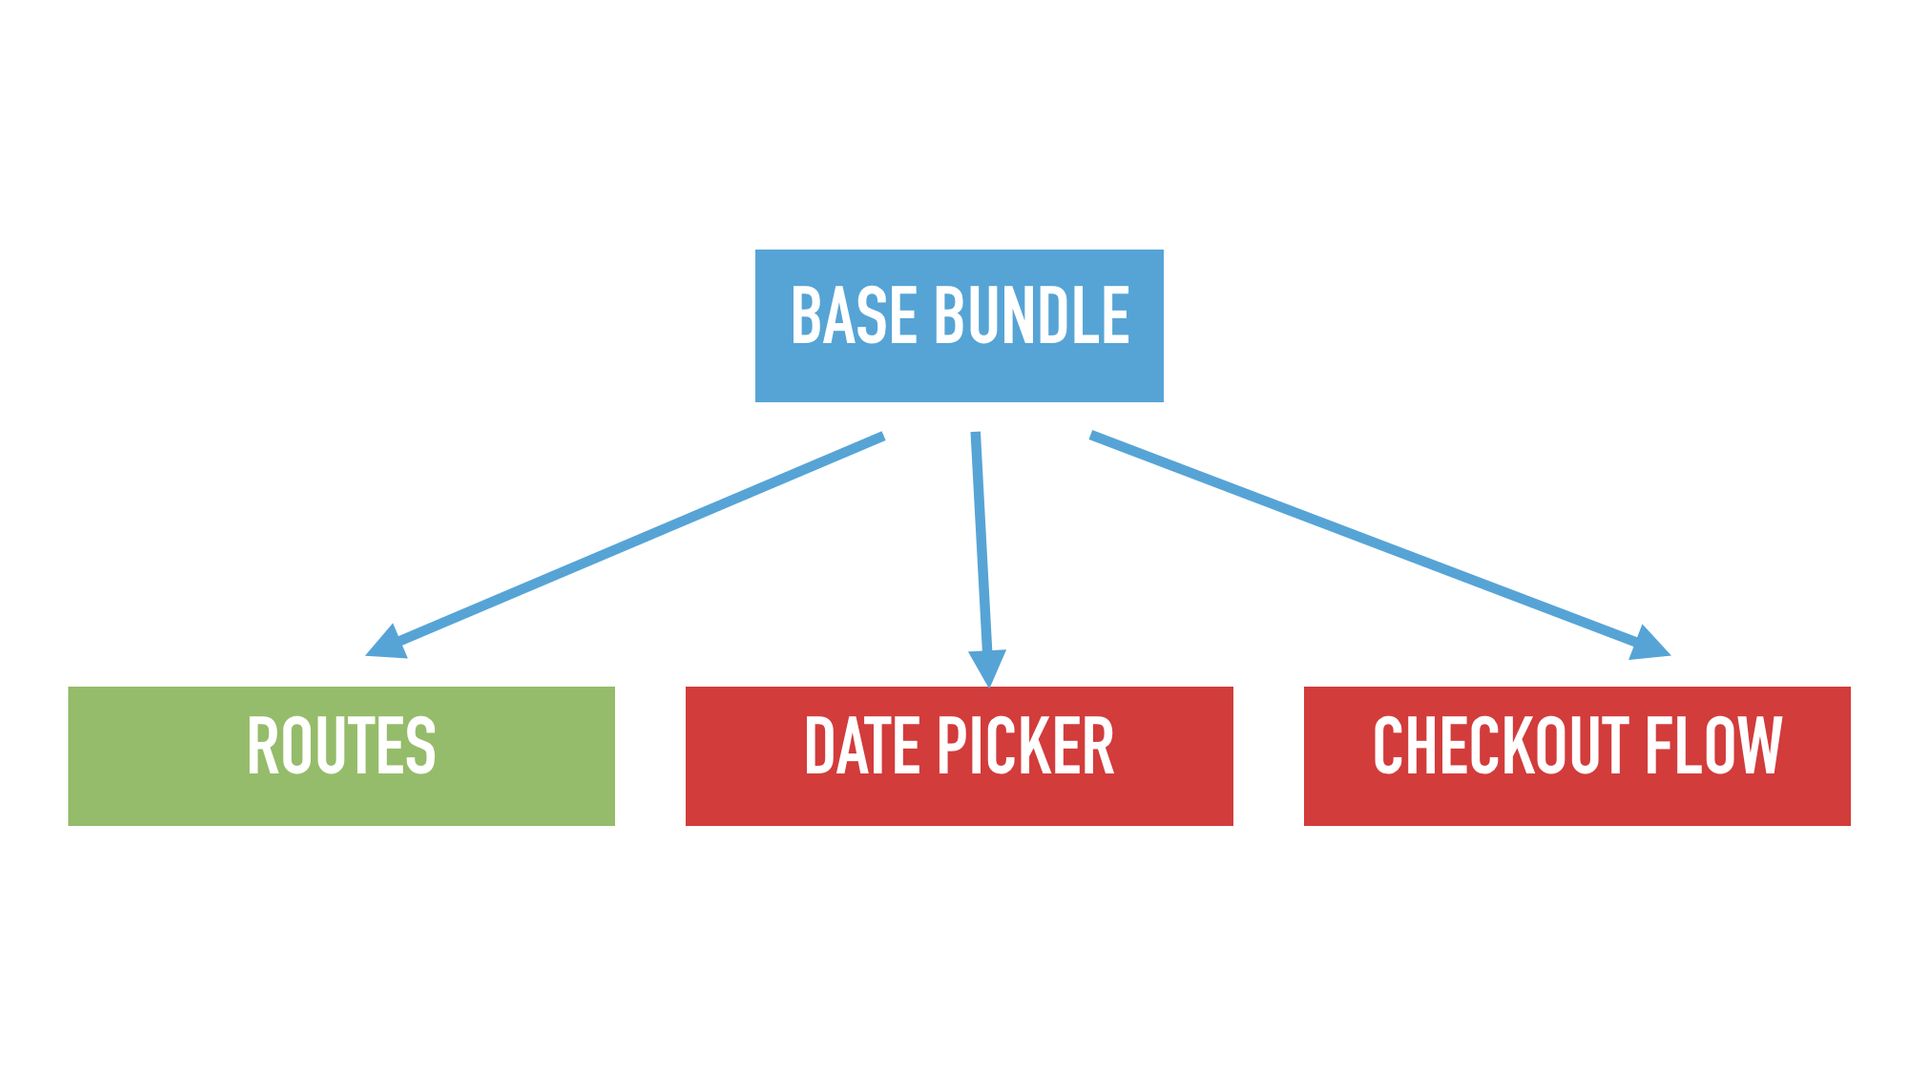 Slide text: Base bundle pointing to 3 different dependencies.